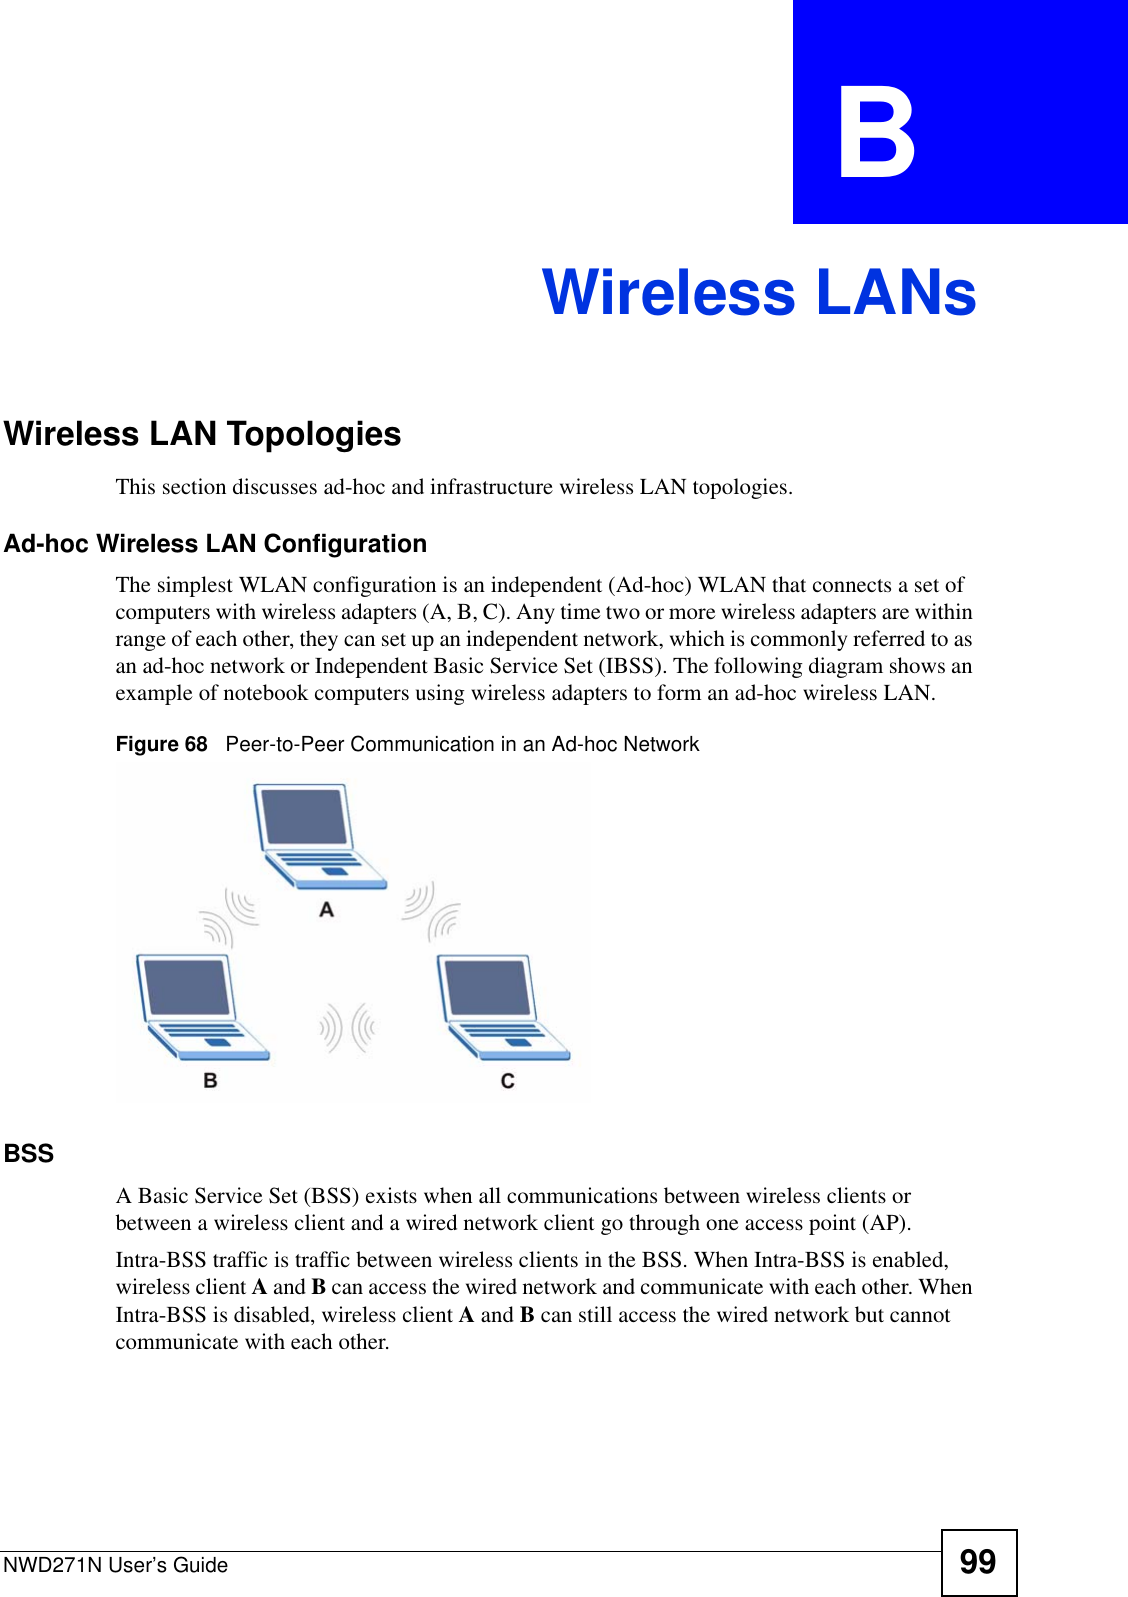 NWD271N User’s Guide 99APPENDIX  B Wireless LANsWireless LAN TopologiesThis section discusses ad-hoc and infrastructure wireless LAN topologies.Ad-hoc Wireless LAN ConfigurationThe simplest WLAN configuration is an independent (Ad-hoc) WLAN that connects a set of computers with wireless adapters (A, B, C). Any time two or more wireless adapters are within range of each other, they can set up an independent network, which is commonly referred to as an ad-hoc network or Independent Basic Service Set (IBSS). The following diagram shows an example of notebook computers using wireless adapters to form an ad-hoc wireless LAN. Figure 68   Peer-to-Peer Communication in an Ad-hoc NetworkBSSA Basic Service Set (BSS) exists when all communications between wireless clients or between a wireless client and a wired network client go through one access point (AP). Intra-BSS traffic is traffic between wireless clients in the BSS. When Intra-BSS is enabled, wireless client A and B can access the wired network and communicate with each other. When Intra-BSS is disabled, wireless client A and B can still access the wired network but cannot communicate with each other.